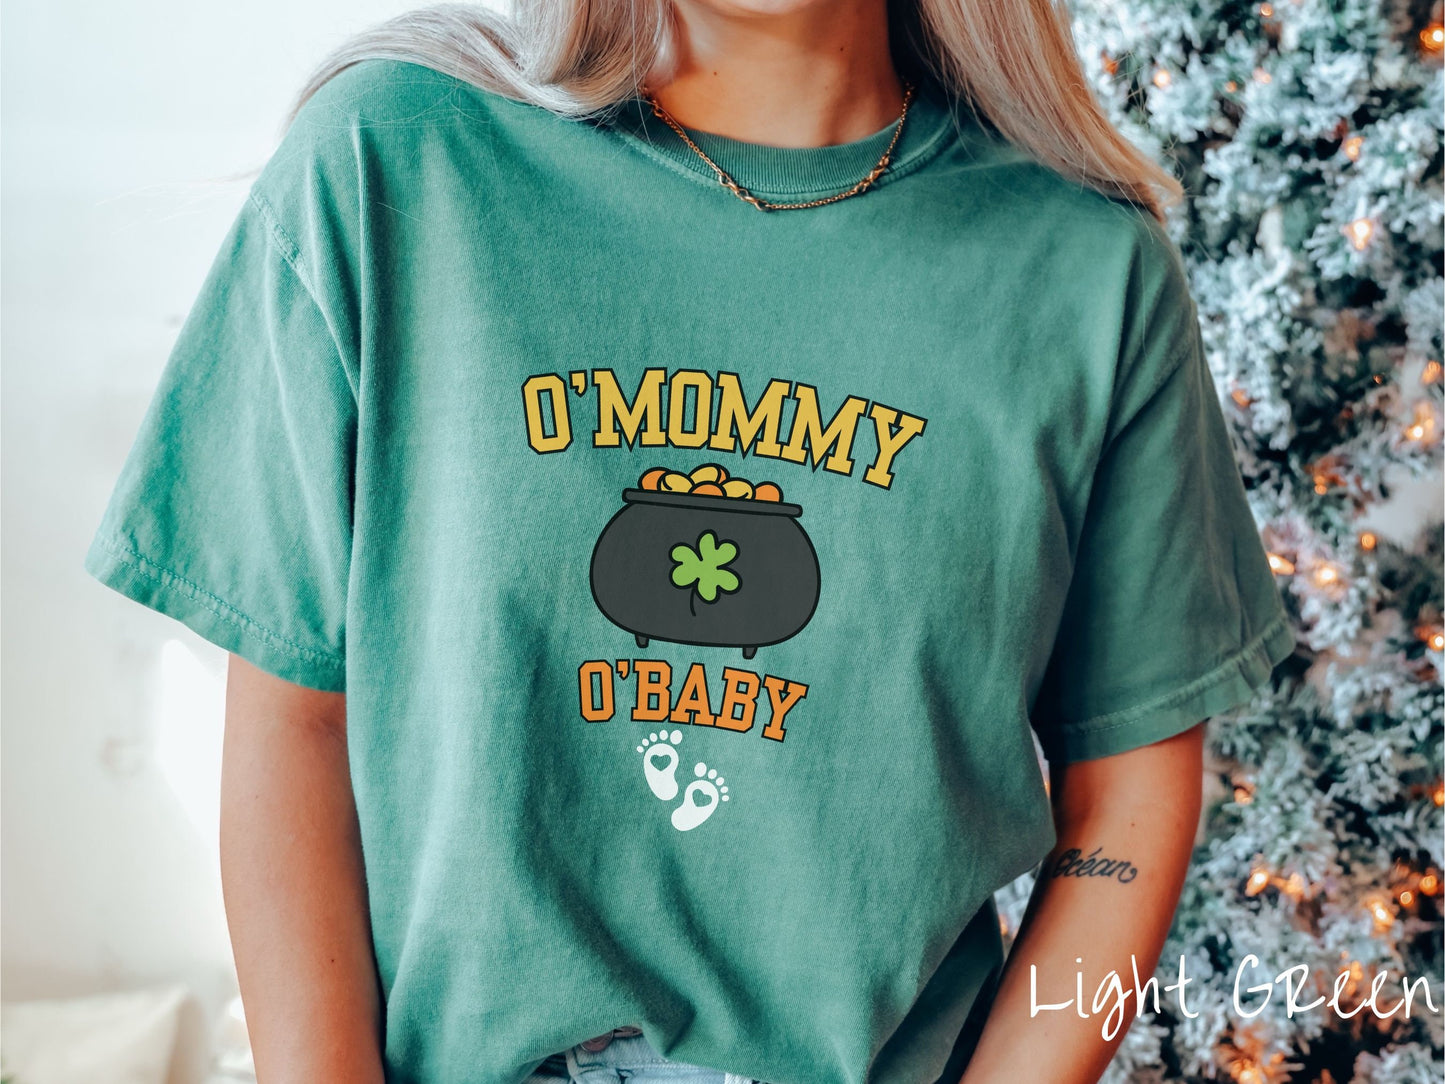 A woman wearing a vintage, light green colored shirt with text O Mommy O Baby in yellow and orange font, a pot of gold with a green clover on it and yellow and orange gold coins inside. Below all this are two white baby footprints with pink hearts.